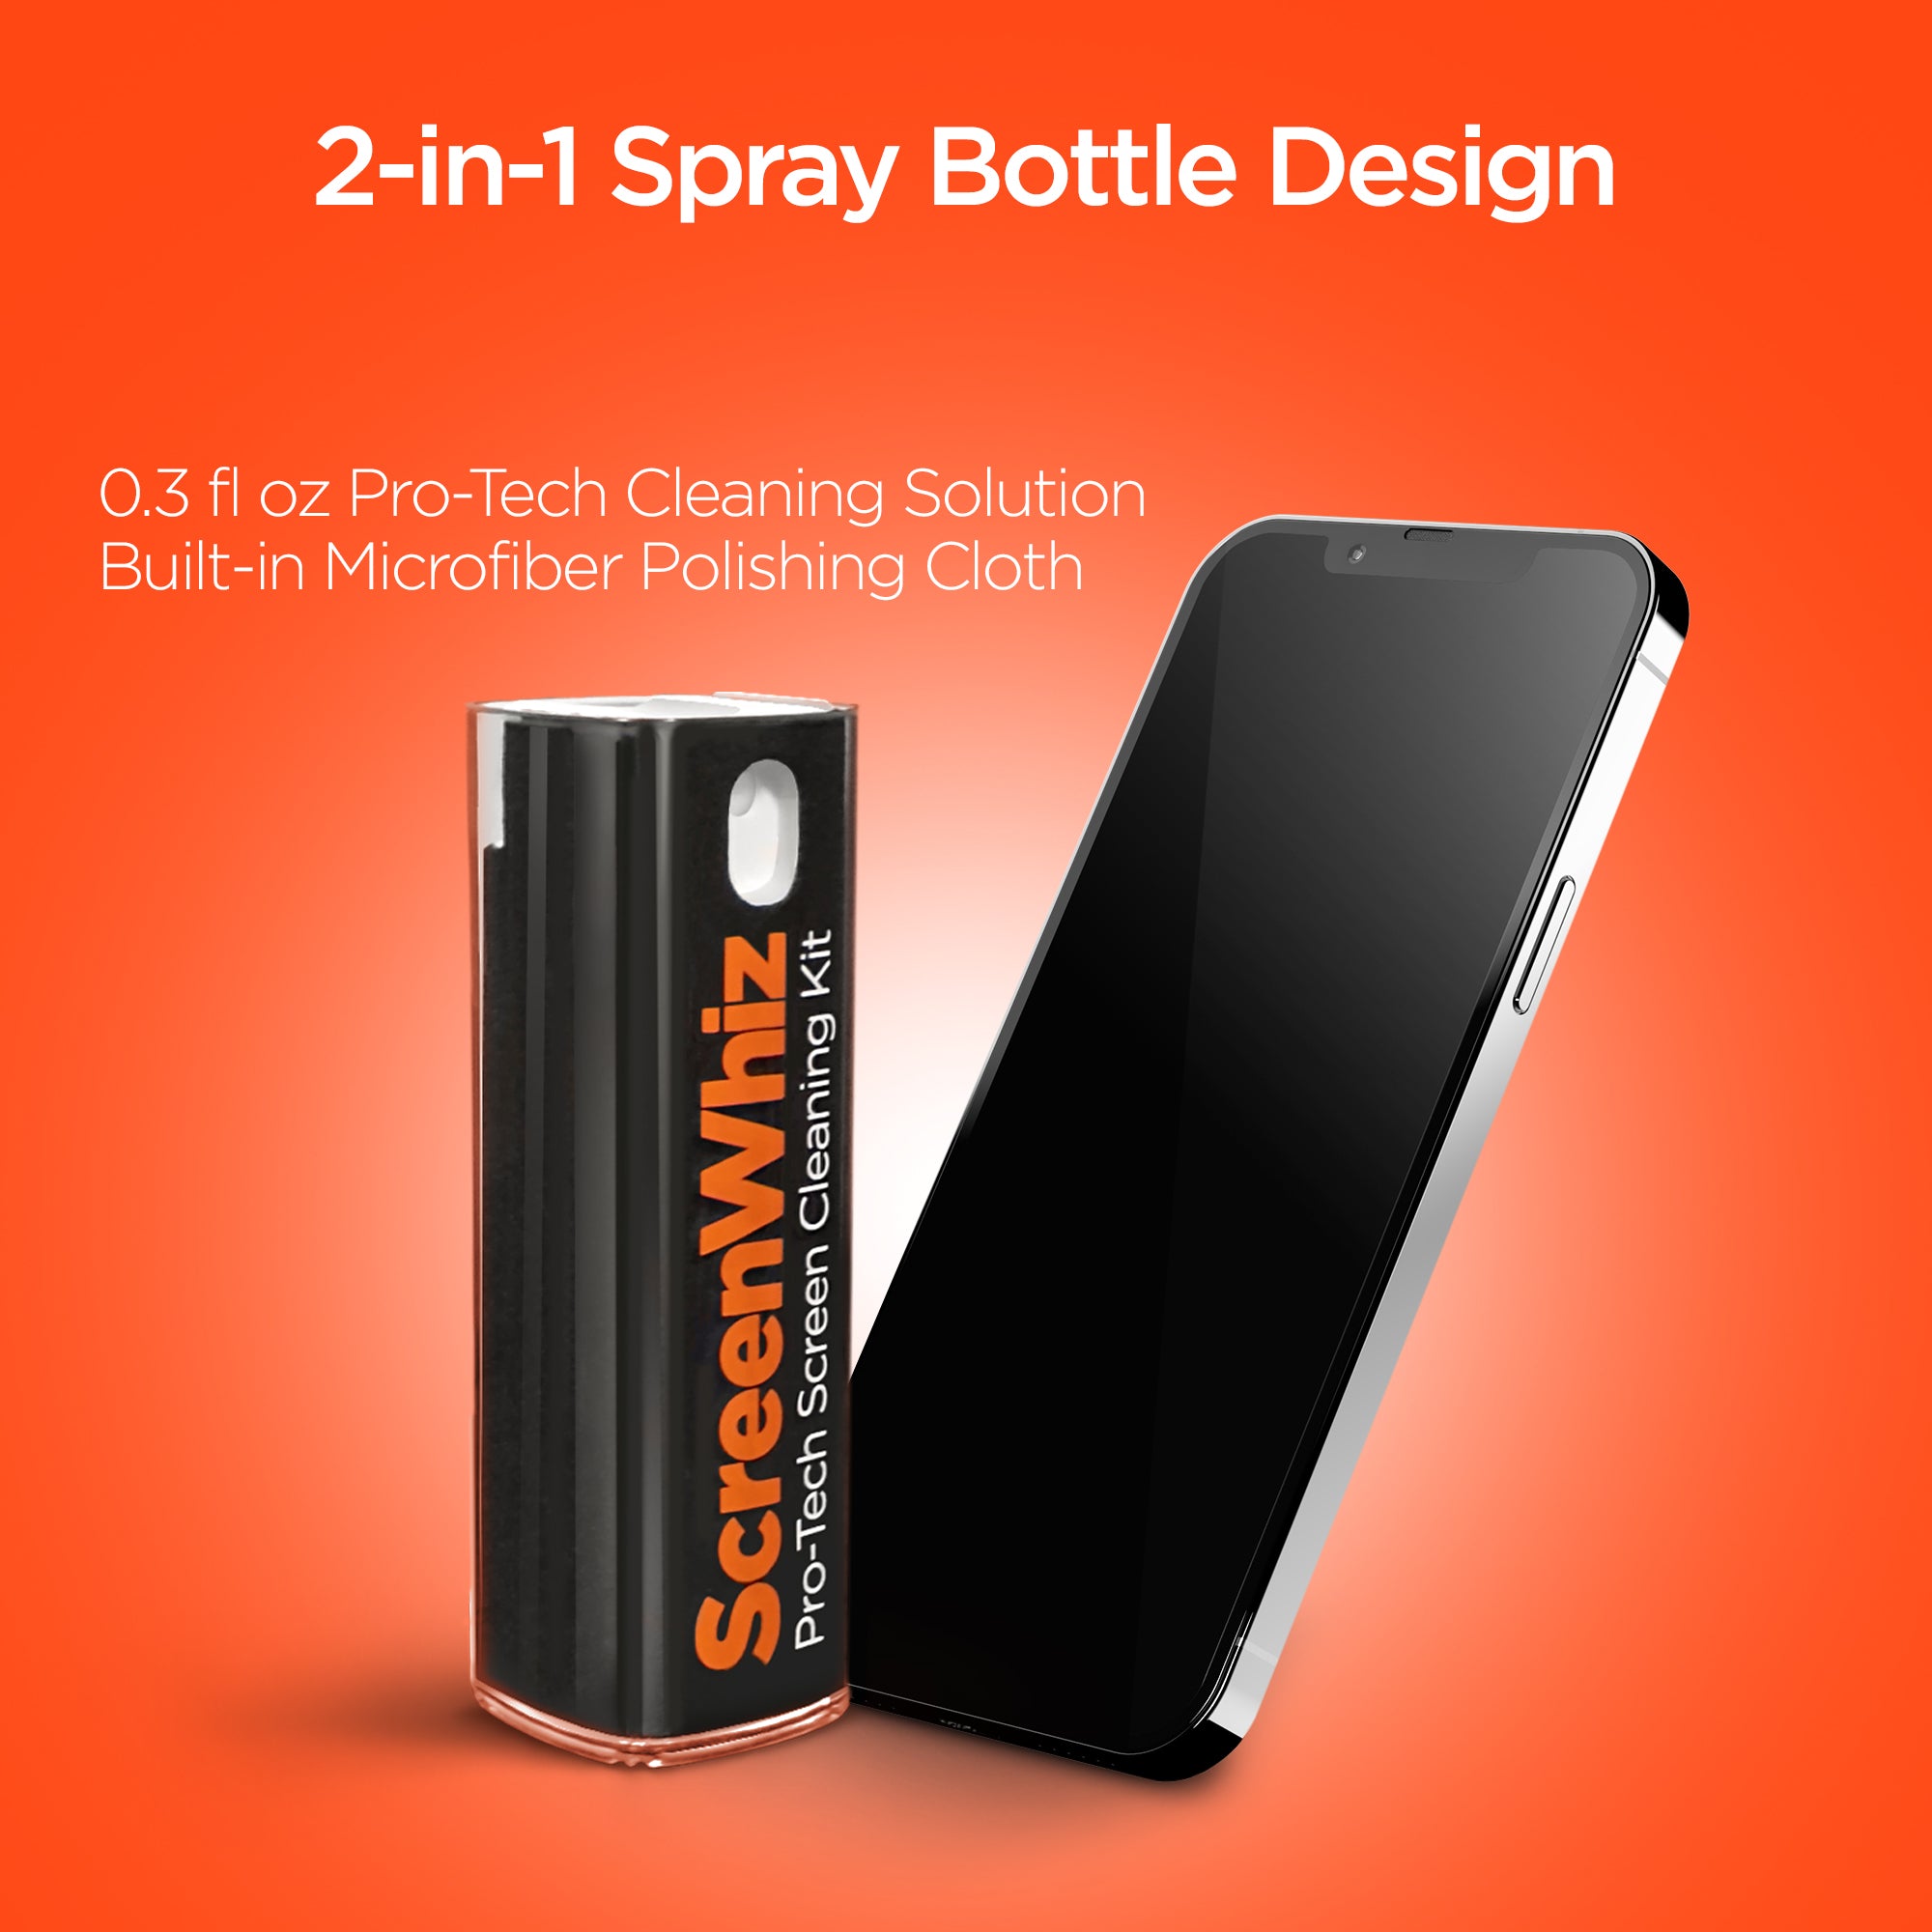 Ultimate 3-in-1 Screen Cleaner Spray & Wipe for Phone, Laptop, Car